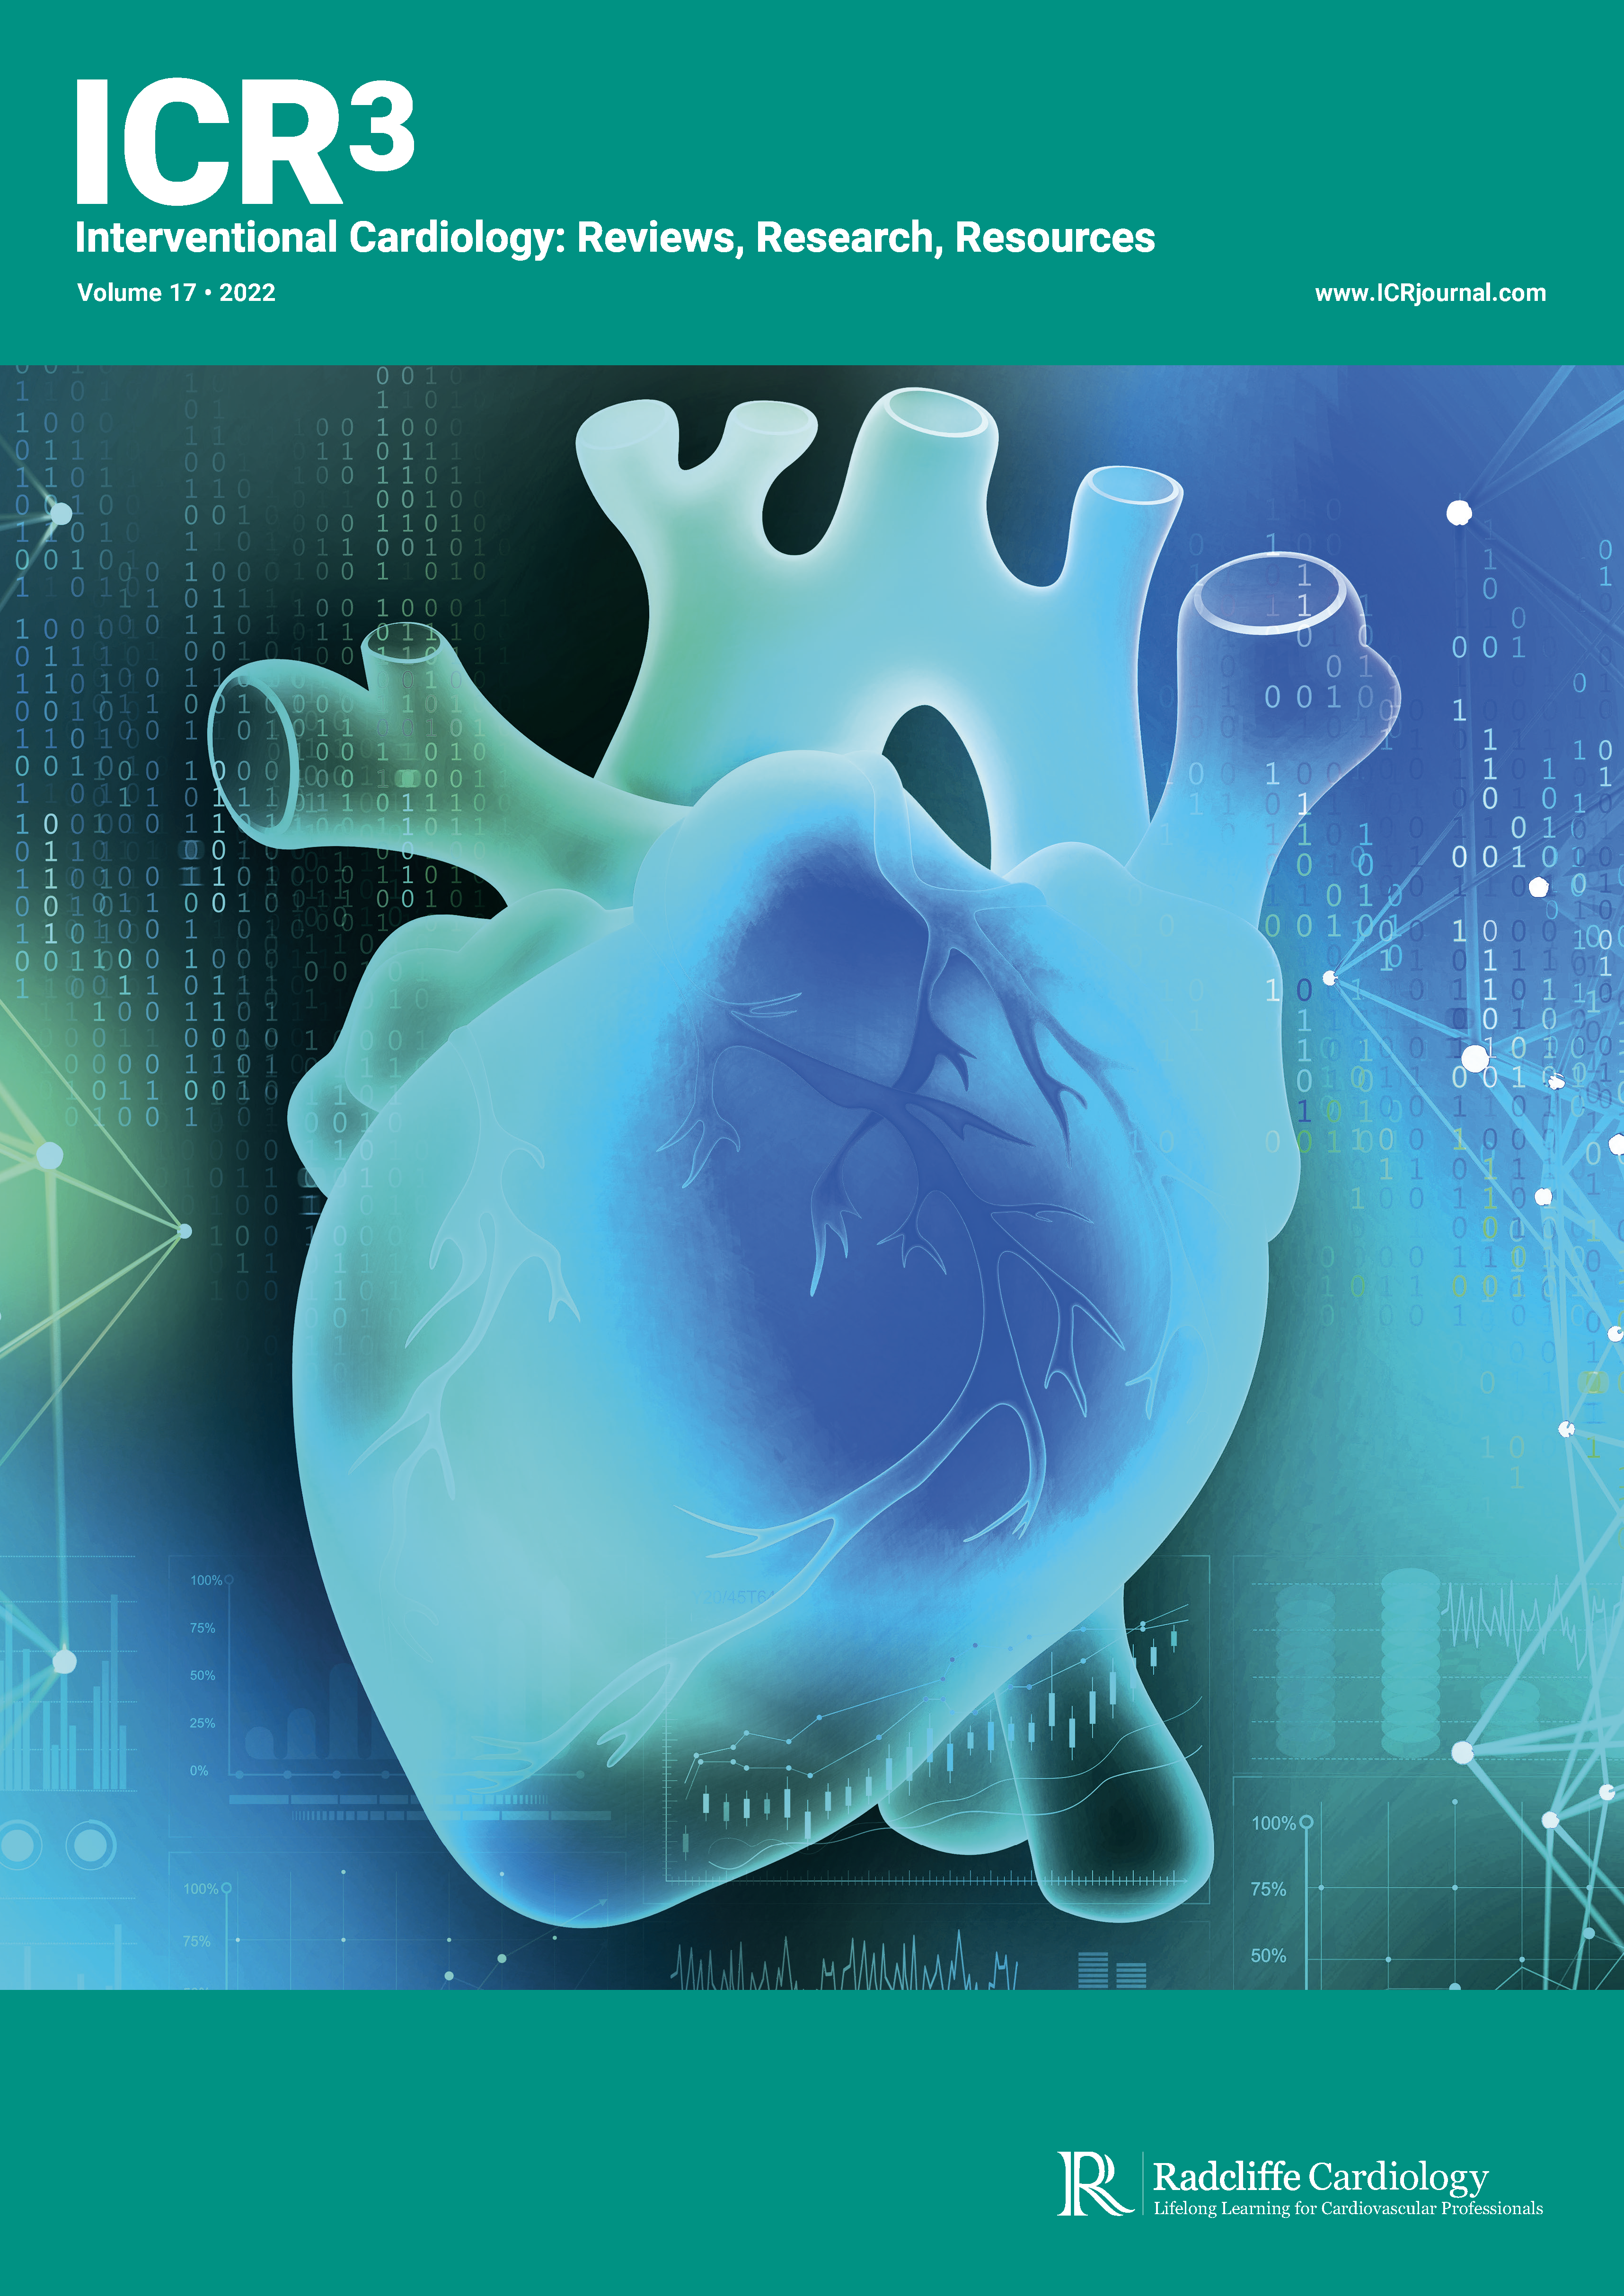 Interventional Cardiology: Reviews, Research, Resources